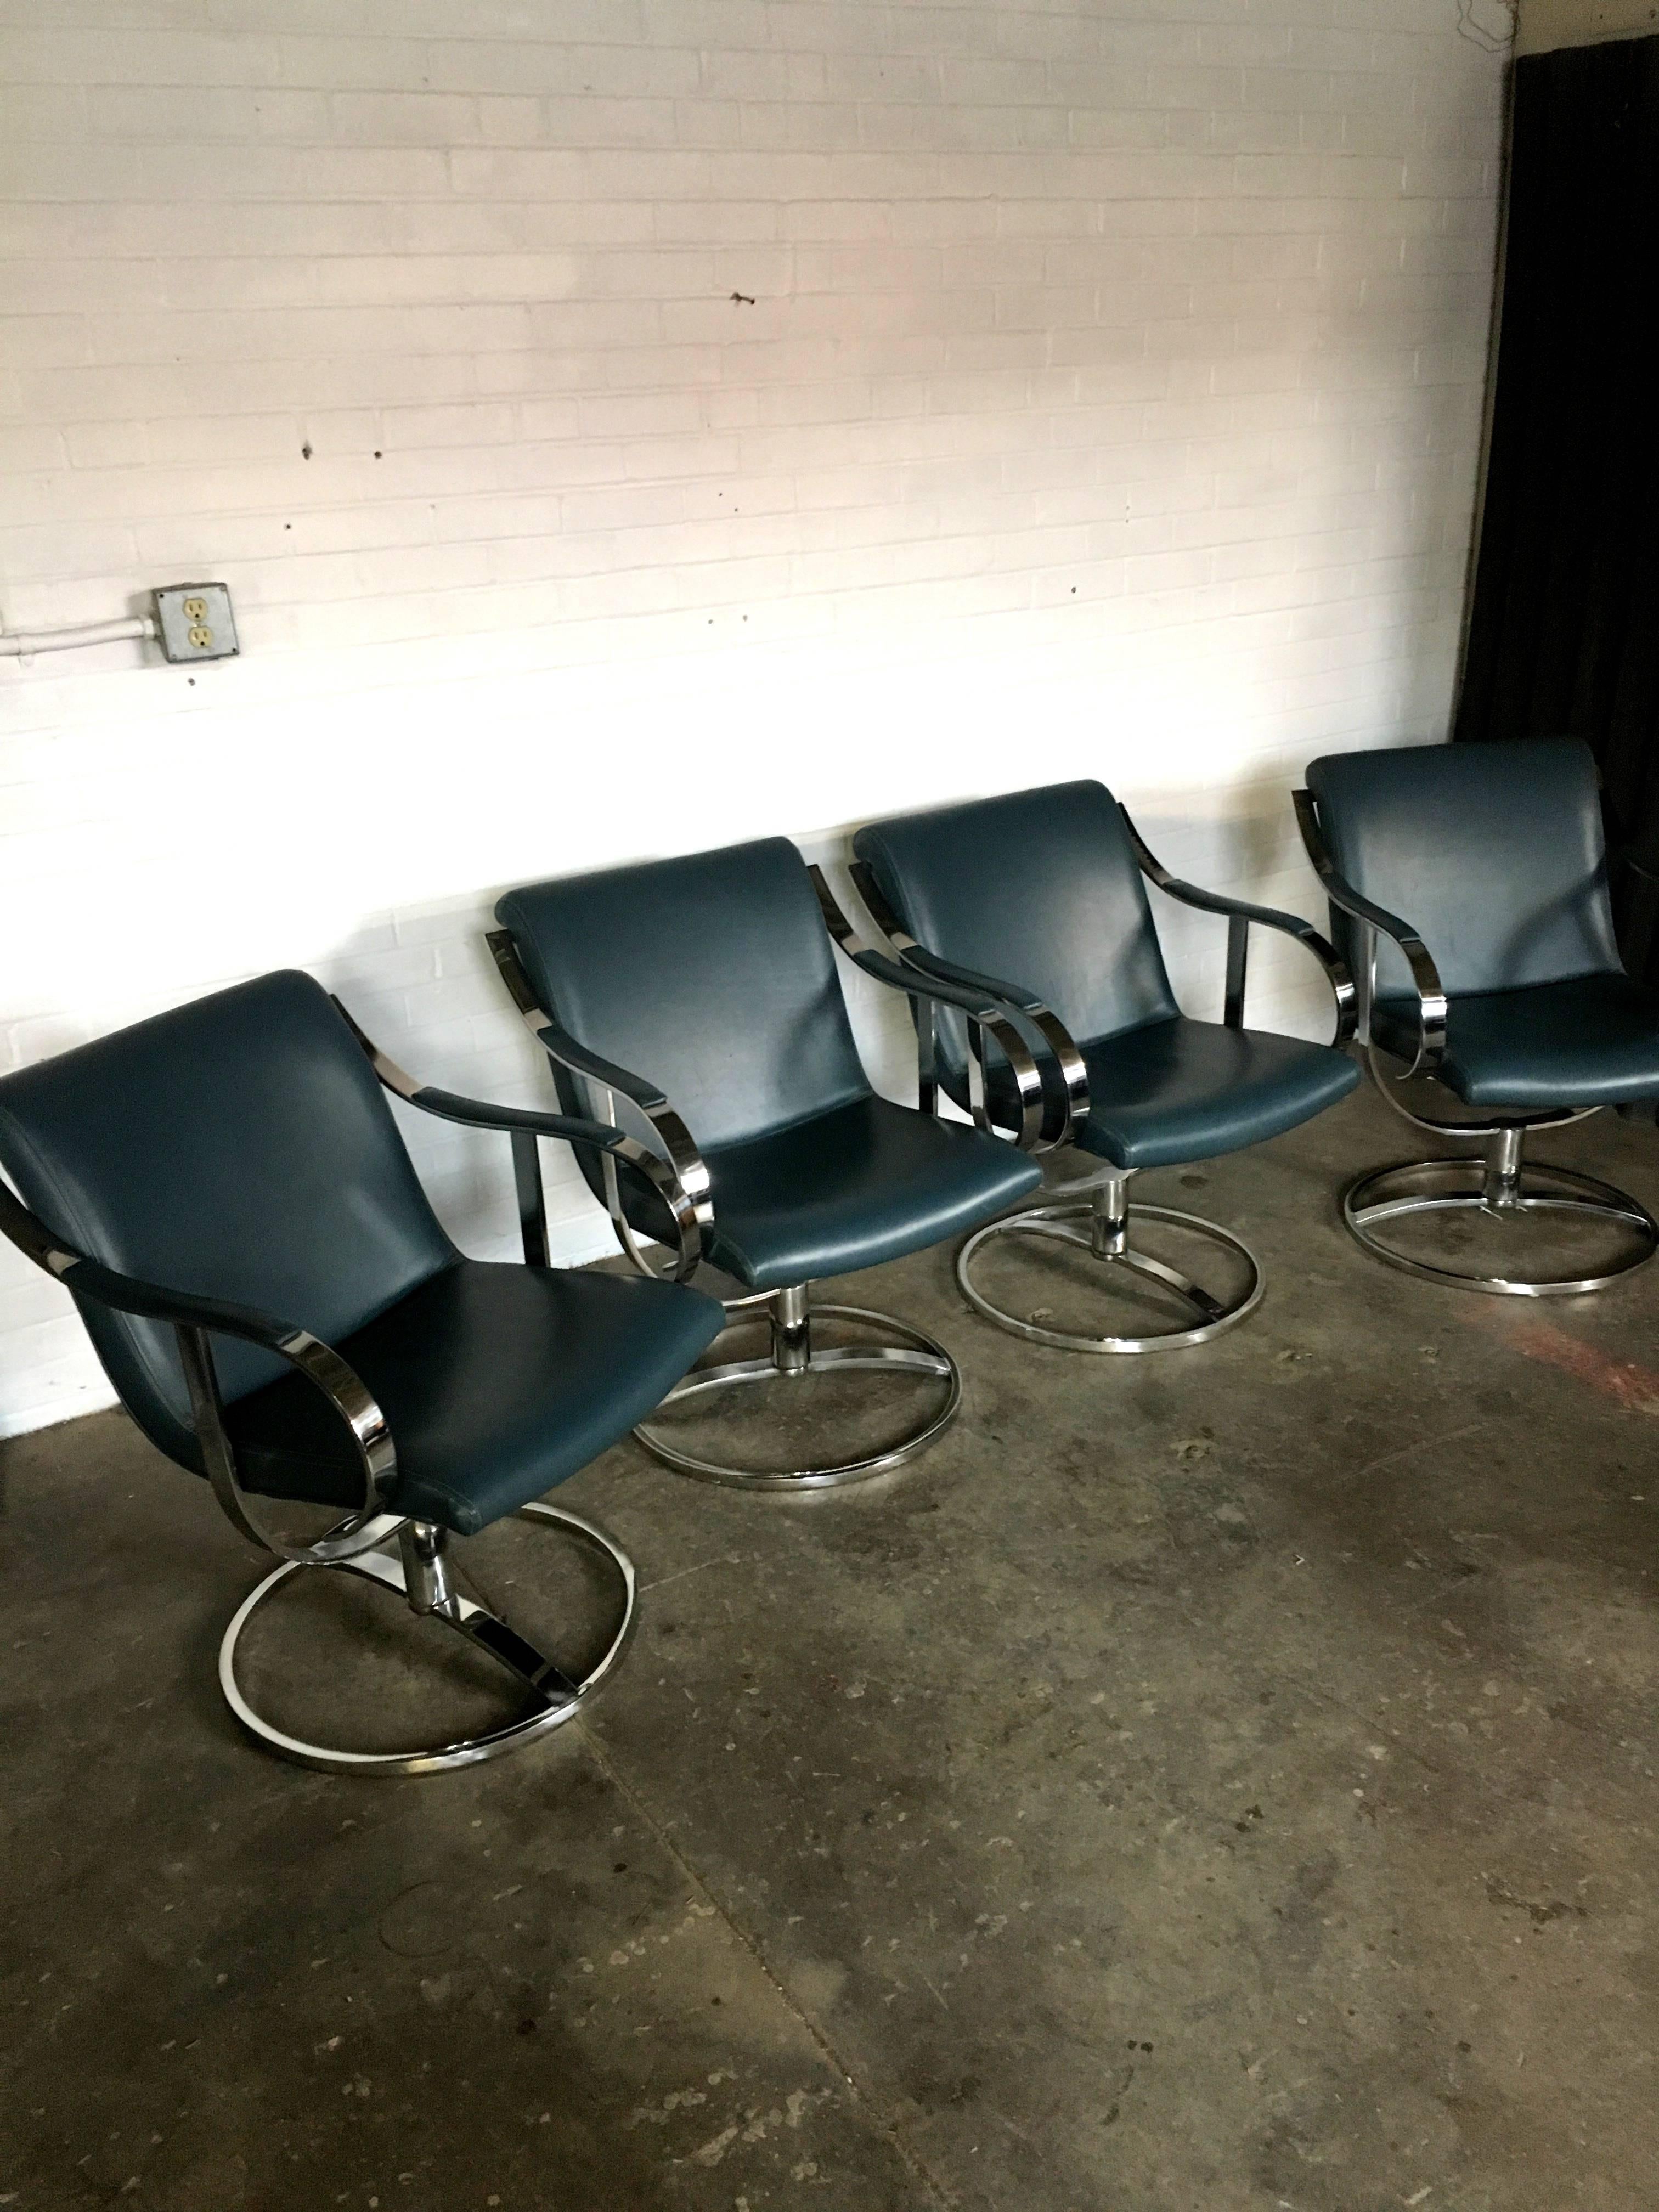 Fantastic grouping of four, incredible chairs by designer Gardner Leaver of Steelcase.
When you find one, it's great. Two, you're lucky. But finding four is almost impossible! And in this condition, almost never!
Chairs are in fantastic condition